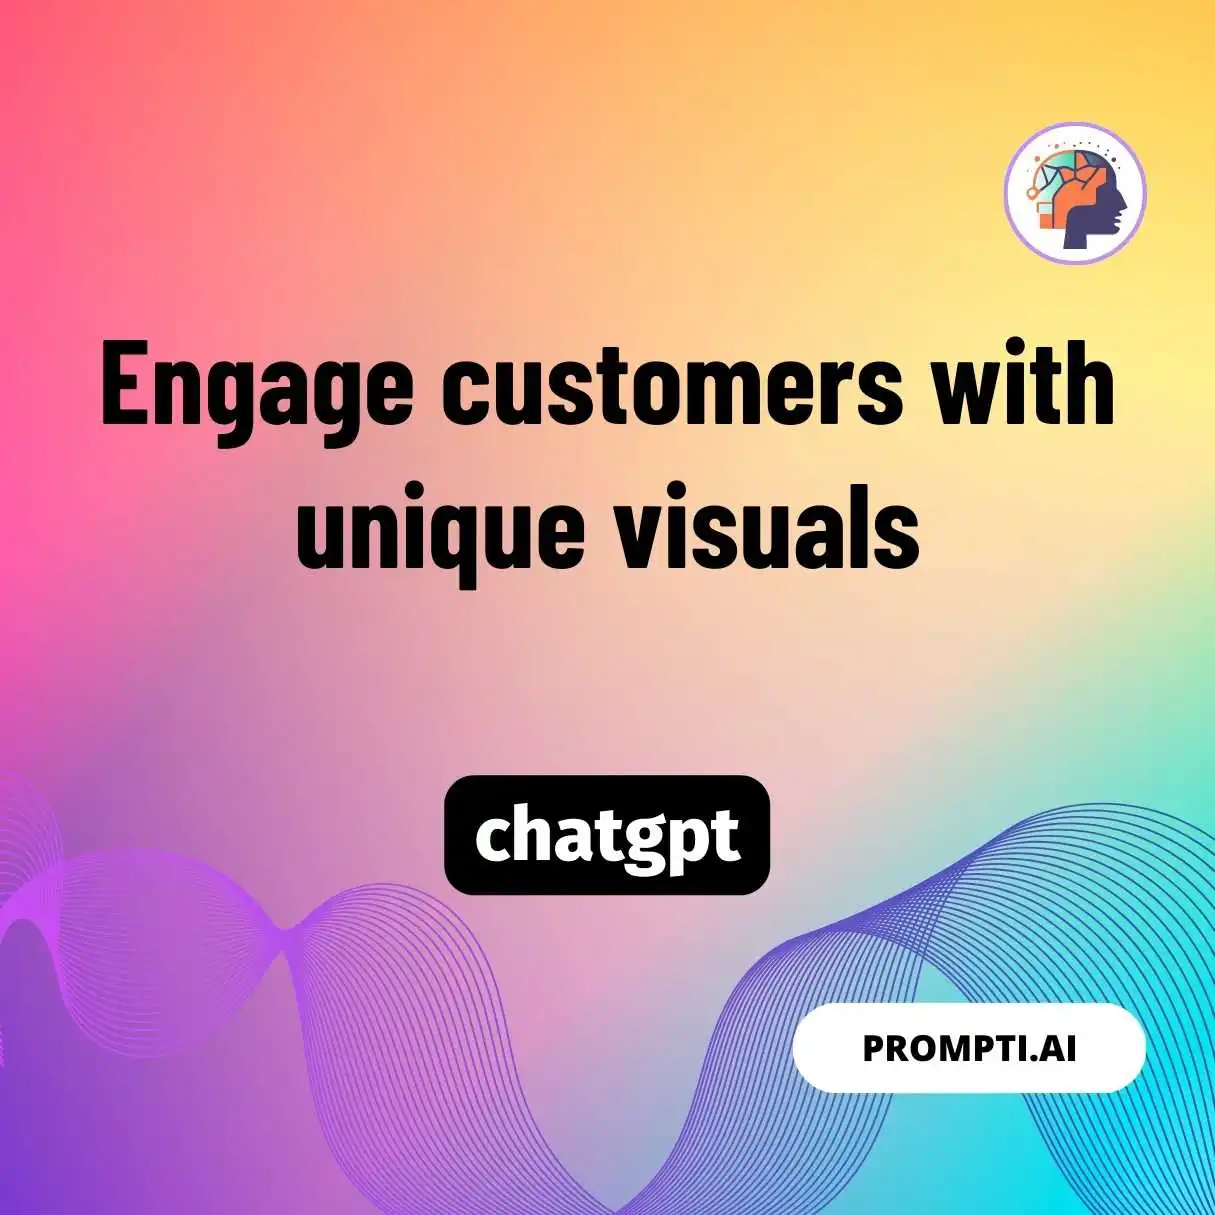 Engage customers with unique visuals